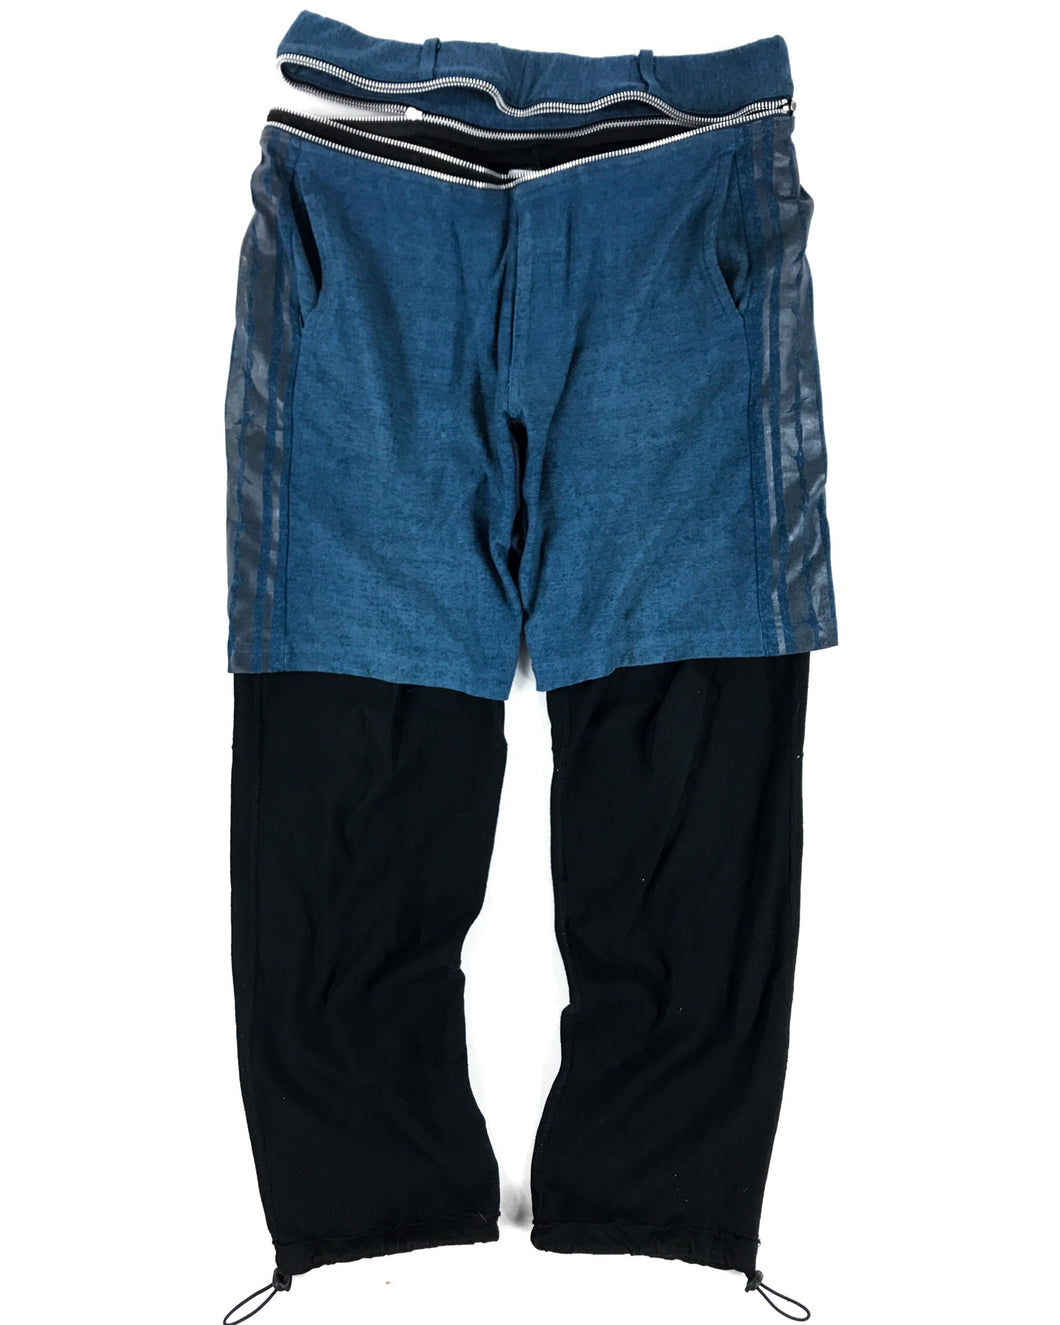 BRAITONE 3in1 Convertible Pants/ Shorts (AW2004)(30-34”)